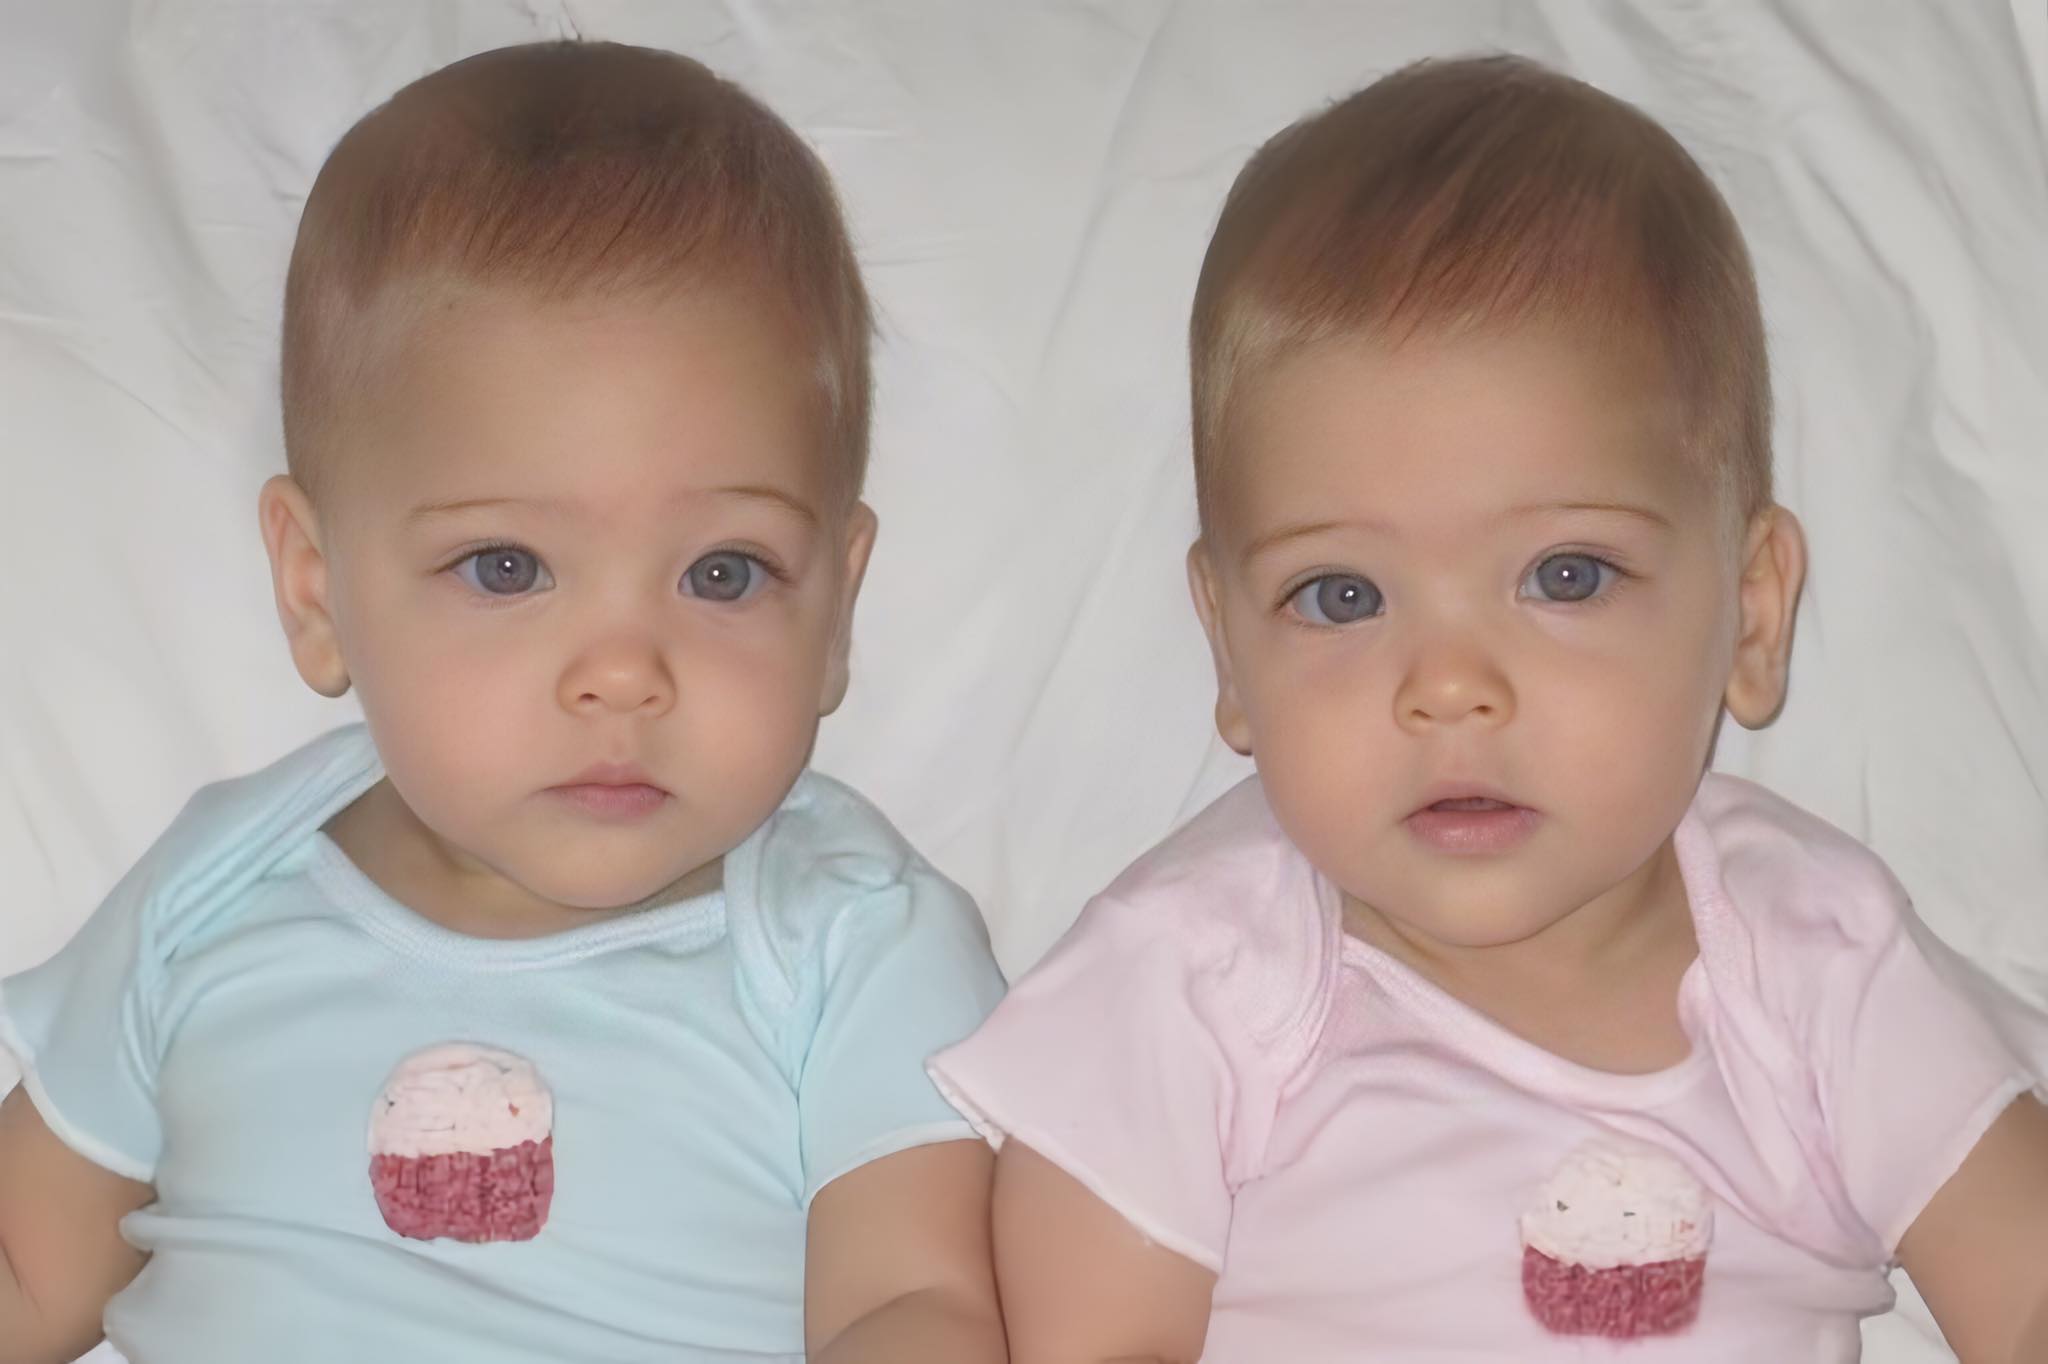 A beautiful decade for the twins dubbed “The most beautiful in the world” with charisma and eyes that captivate viewers.
